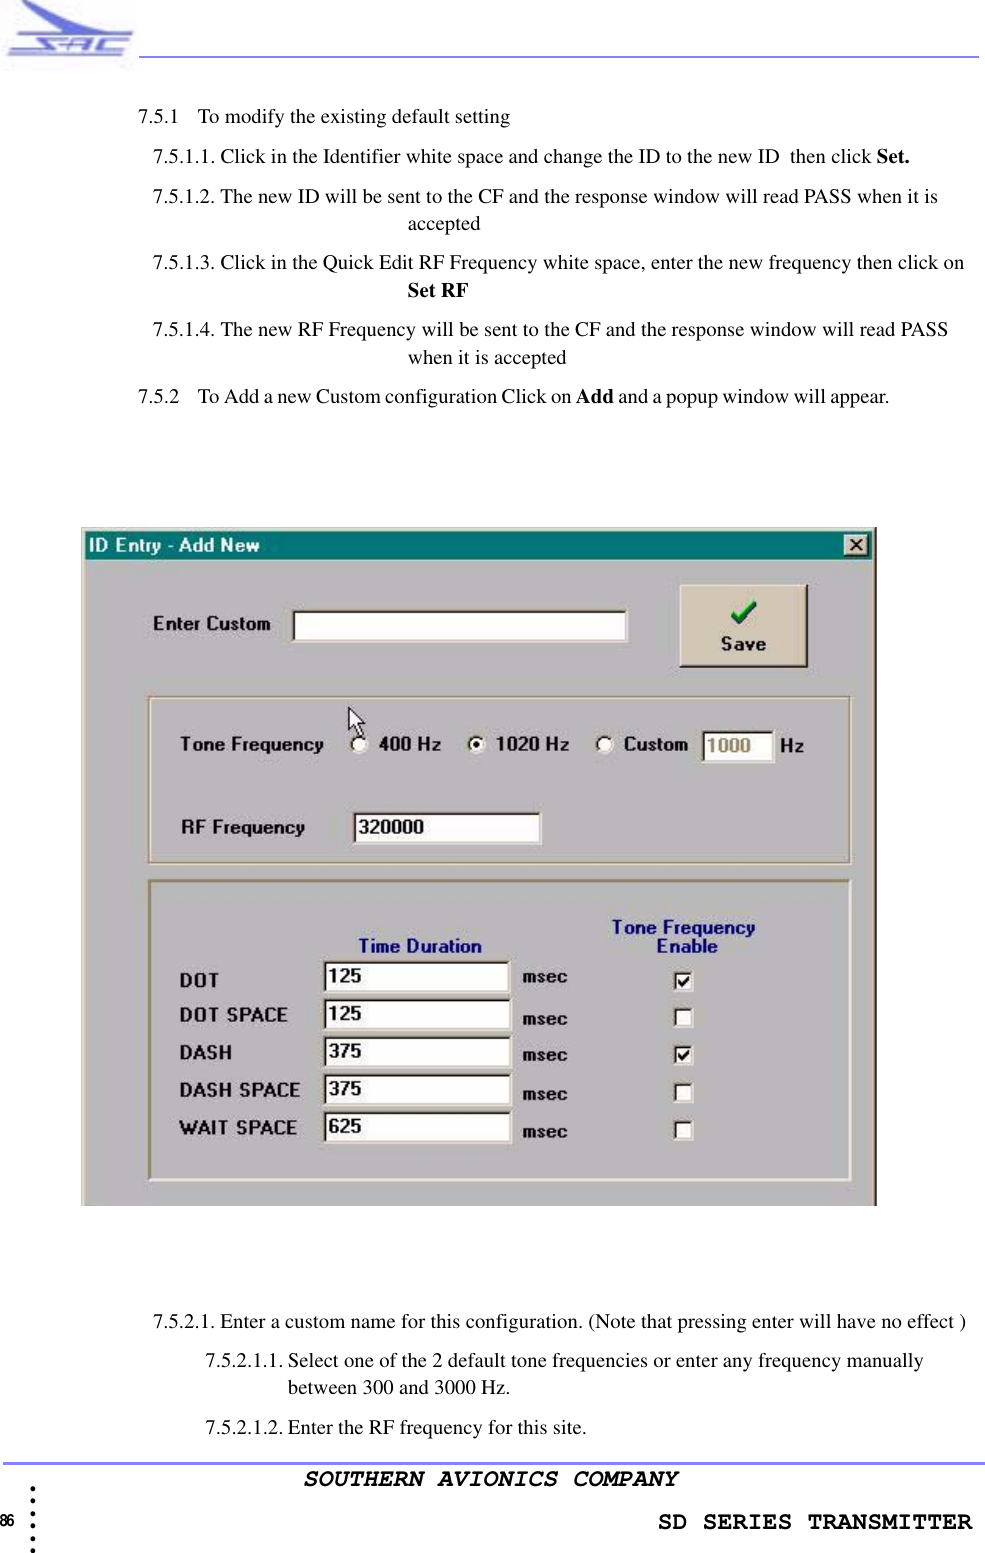                    SD SERIES TRANSMITTER86 • • • •••SOUTHERN AVIONICS COMPANY7.5.1 To modify the existing default setting 7.5.1.1. Click in the Identifier white space and change the ID to the new ID  then click Set.7.5.1.2. The new ID will be sent to the CF and the response window will read PASS when it is accepted7.5.1.3. Click in the Quick Edit RF Frequency white space, enter the new frequency then click on Set RF7.5.1.4. The new RF Frequency will be sent to the CF and the response window will read PASS when it is accepted7.5.2 To Add a new Custom configuration Click on Add and a popup window will appear.                     7.5.2.1. Enter a custom name for this configuration. (Note that pressing enter will have no effect )7.5.2.1.1. Select one of the 2 default tone frequencies or enter any frequency manually between 300 and 3000 Hz. 7.5.2.1.2. Enter the RF frequency for this site.